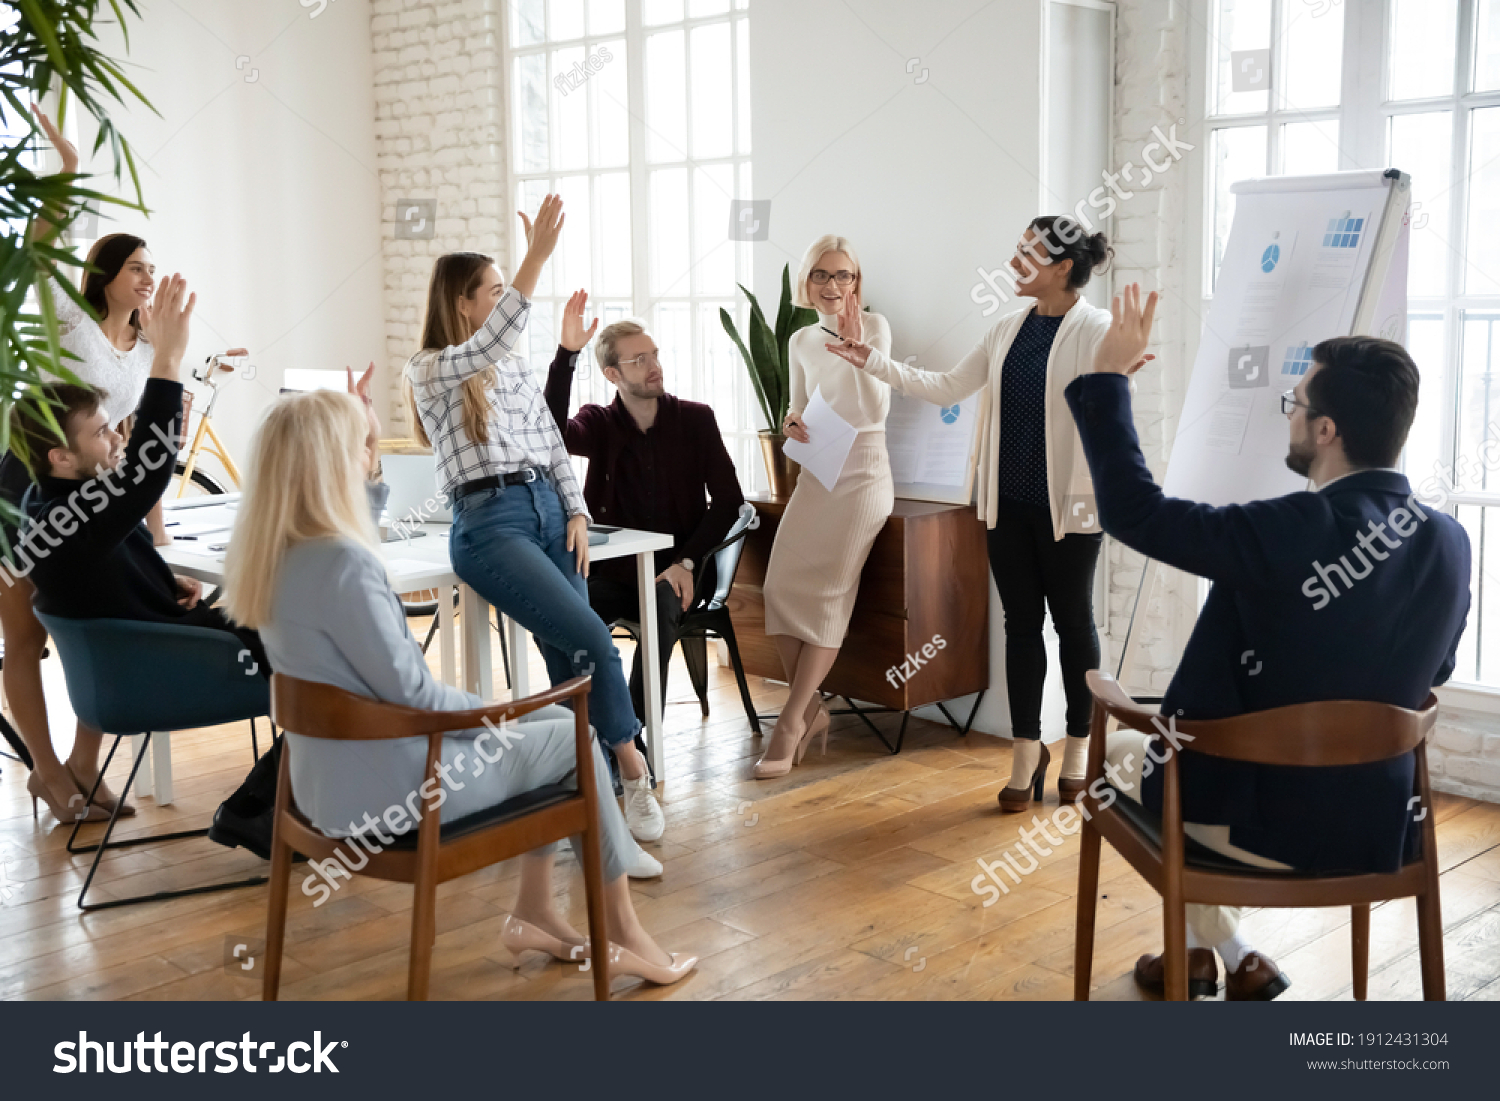 Motivated employees raising hands, asking coach at training. Presenter finishing workshop with questions from engaged audience. Indian female business leader interacting with team at corporate meeting #1912431304